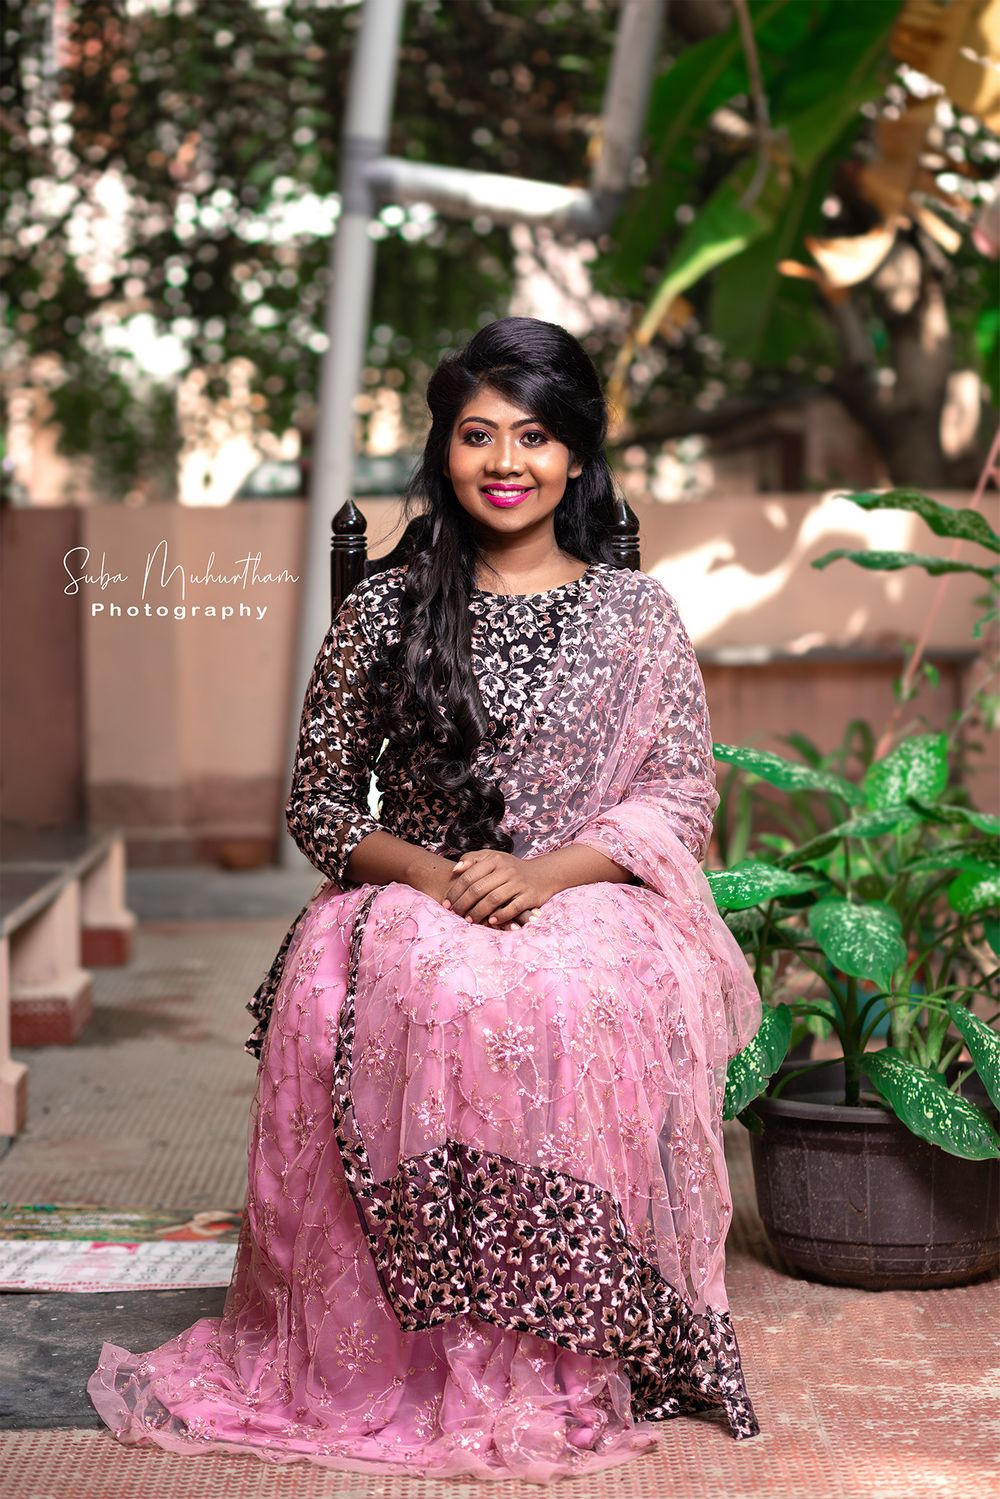 Photo From Christian Wedding - By Aishu Makeover Artistry